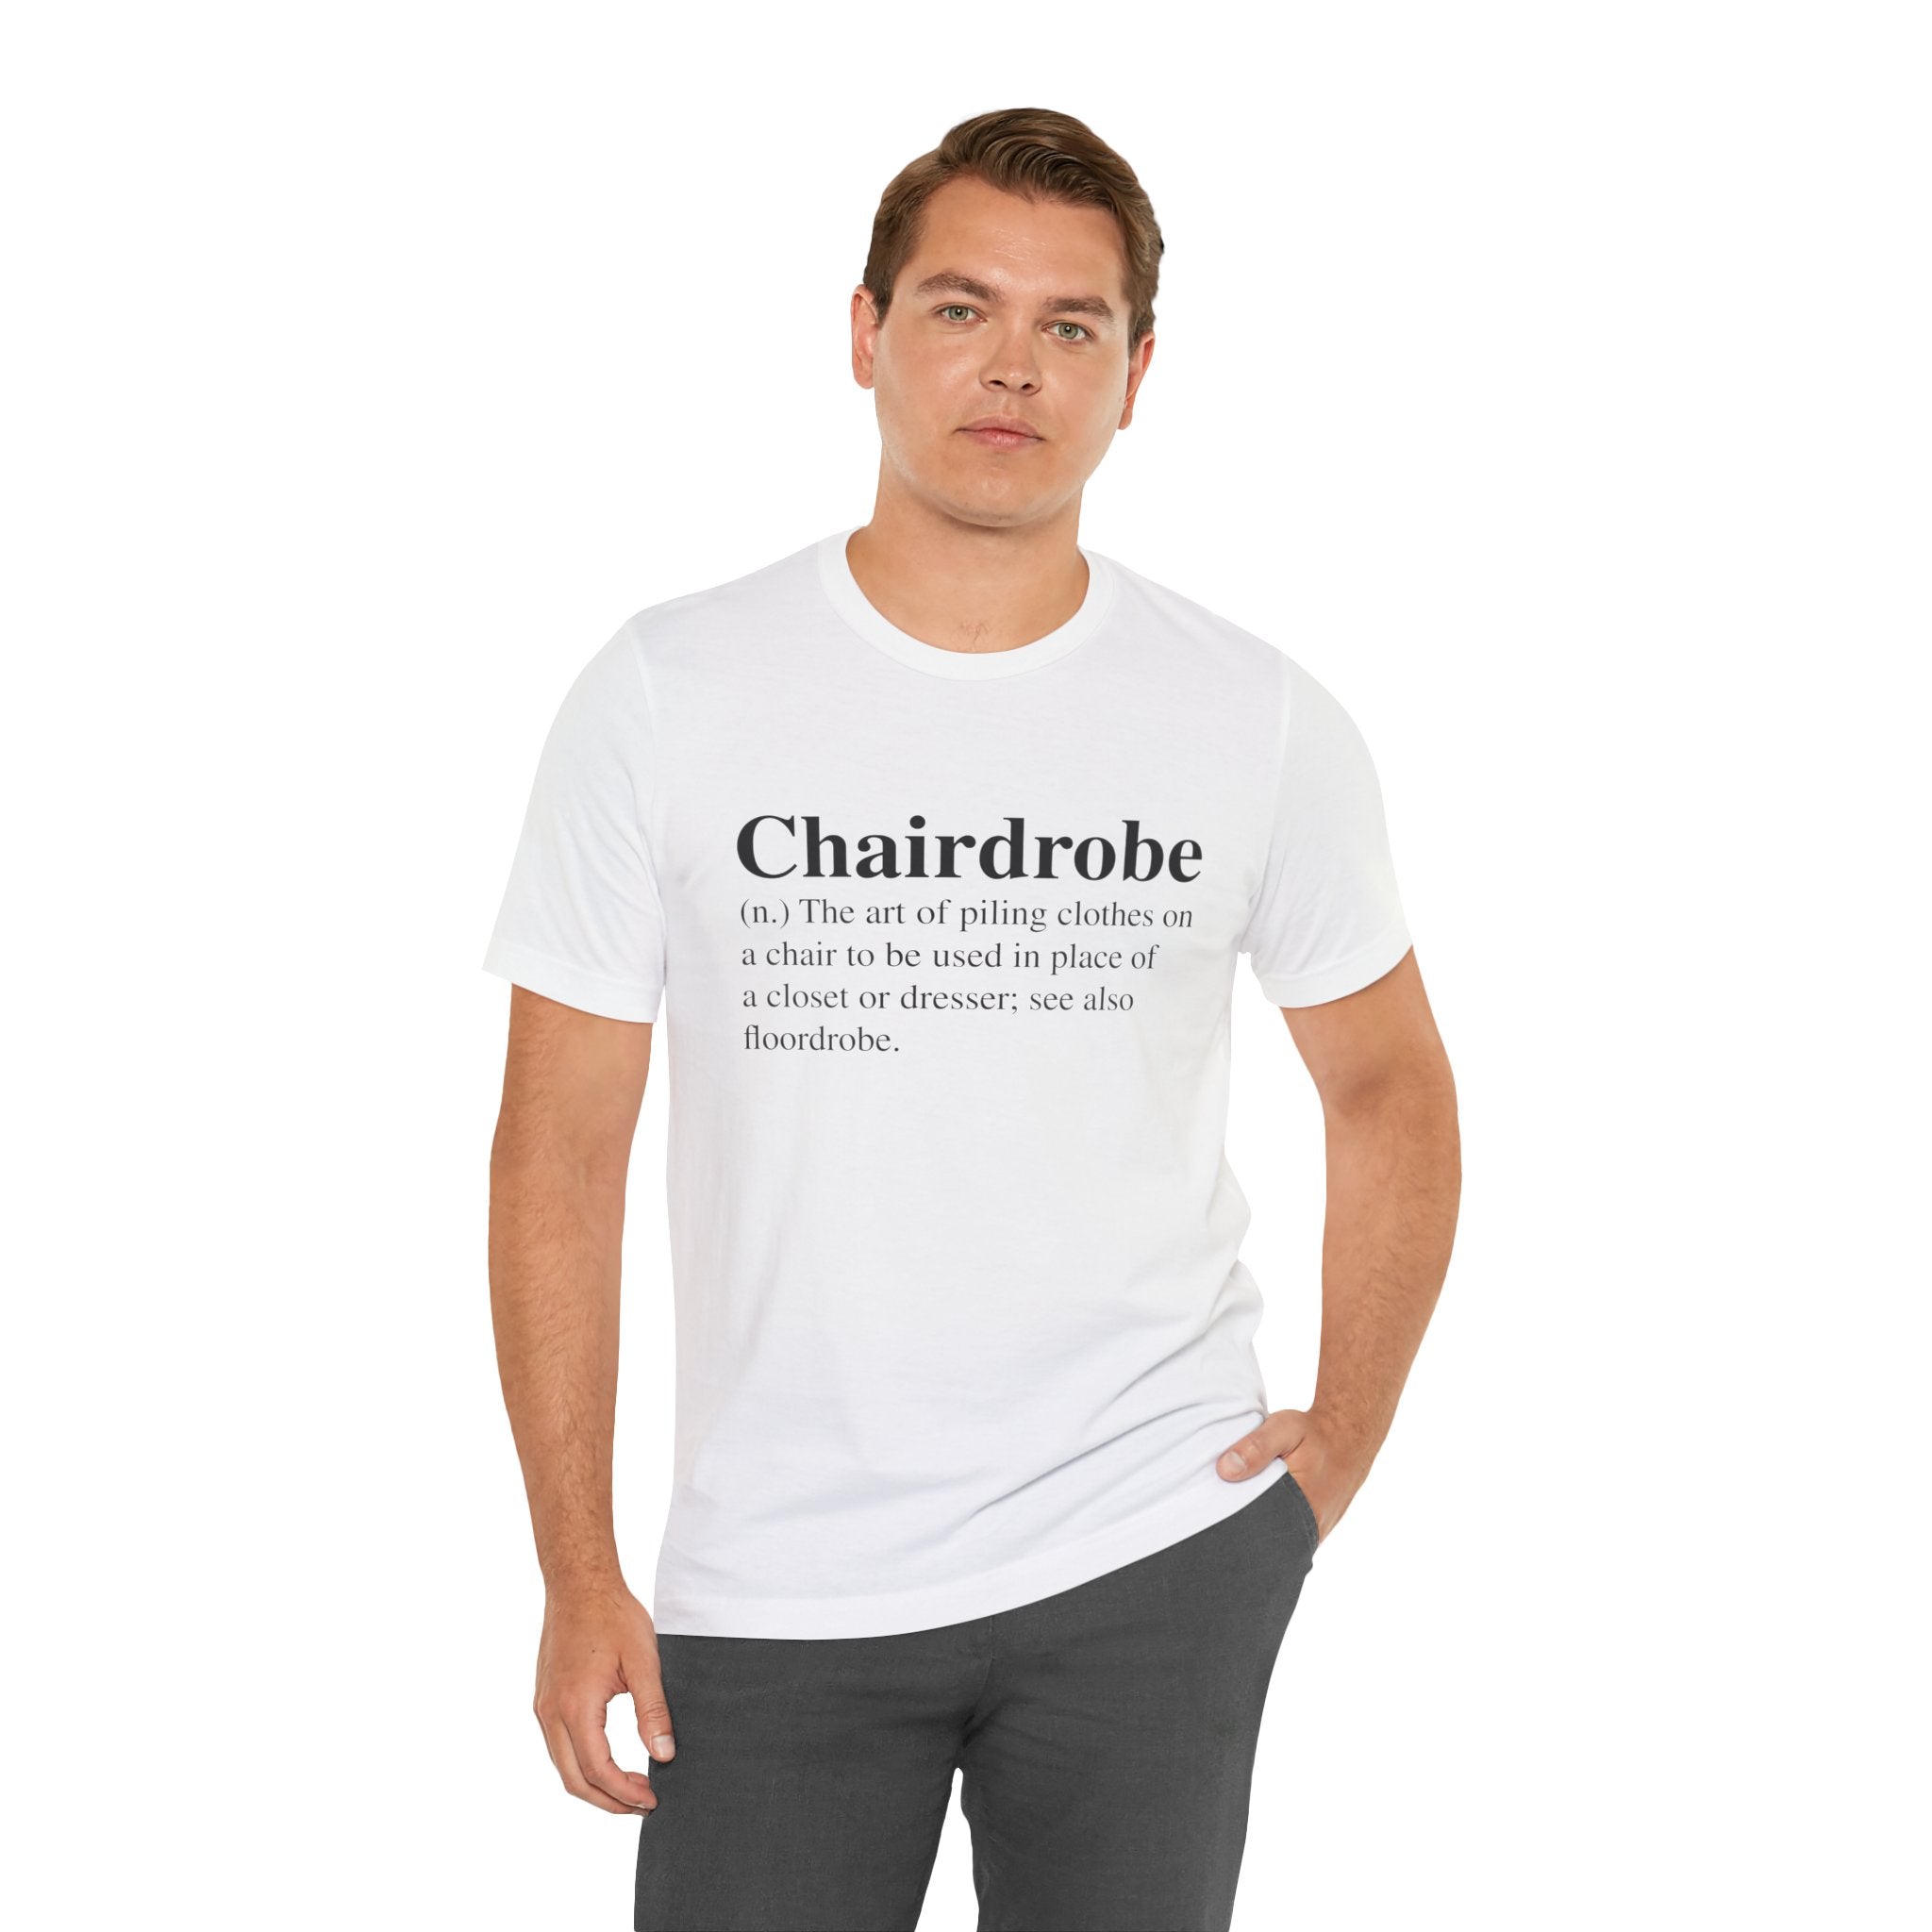 Man in a Chairdrobe T-Shirt standing against a white background.